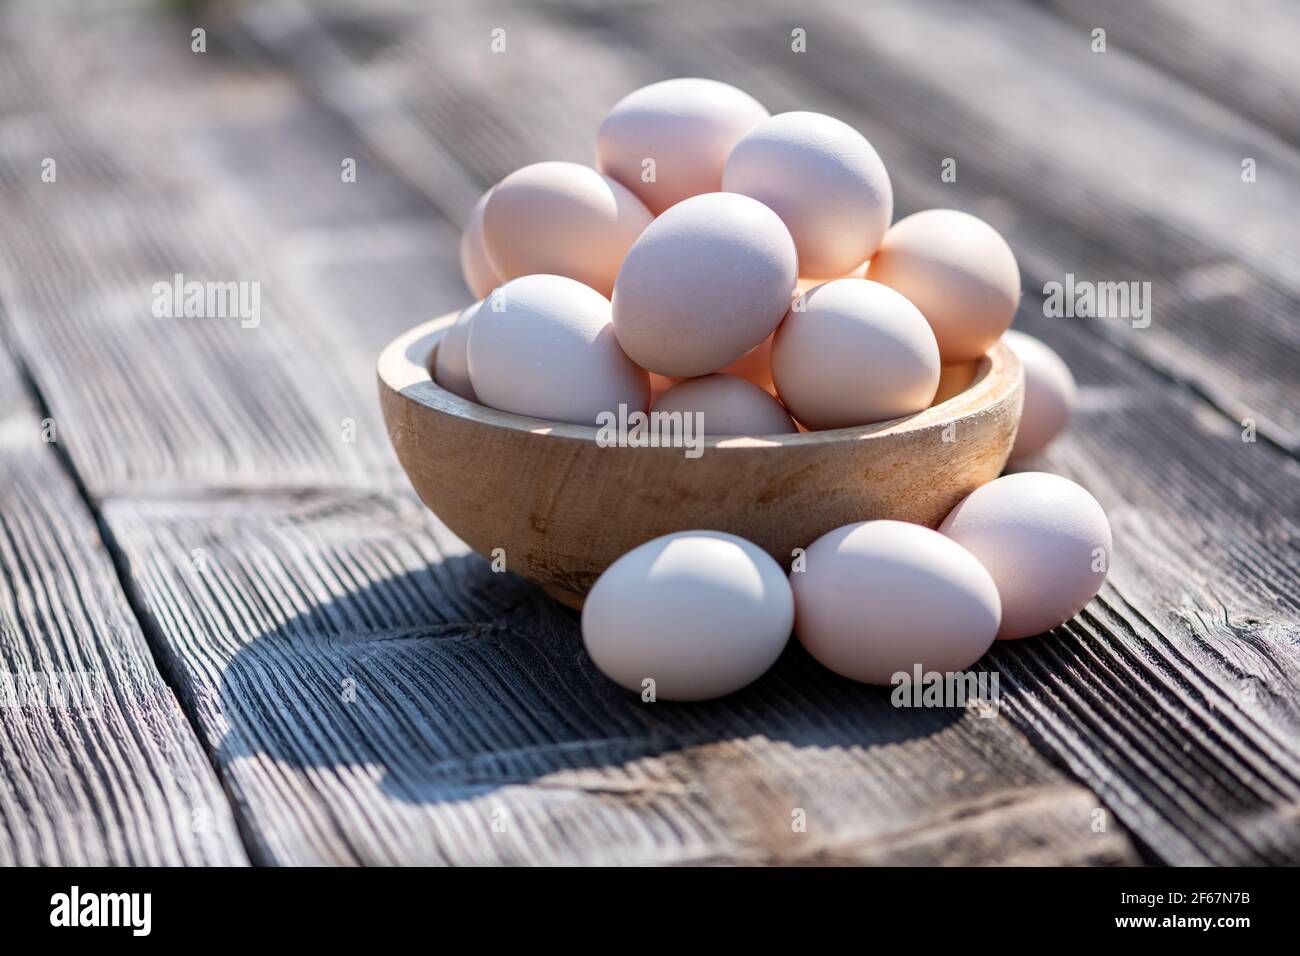 Organic chicken eggs in wooden plate Stock Photo